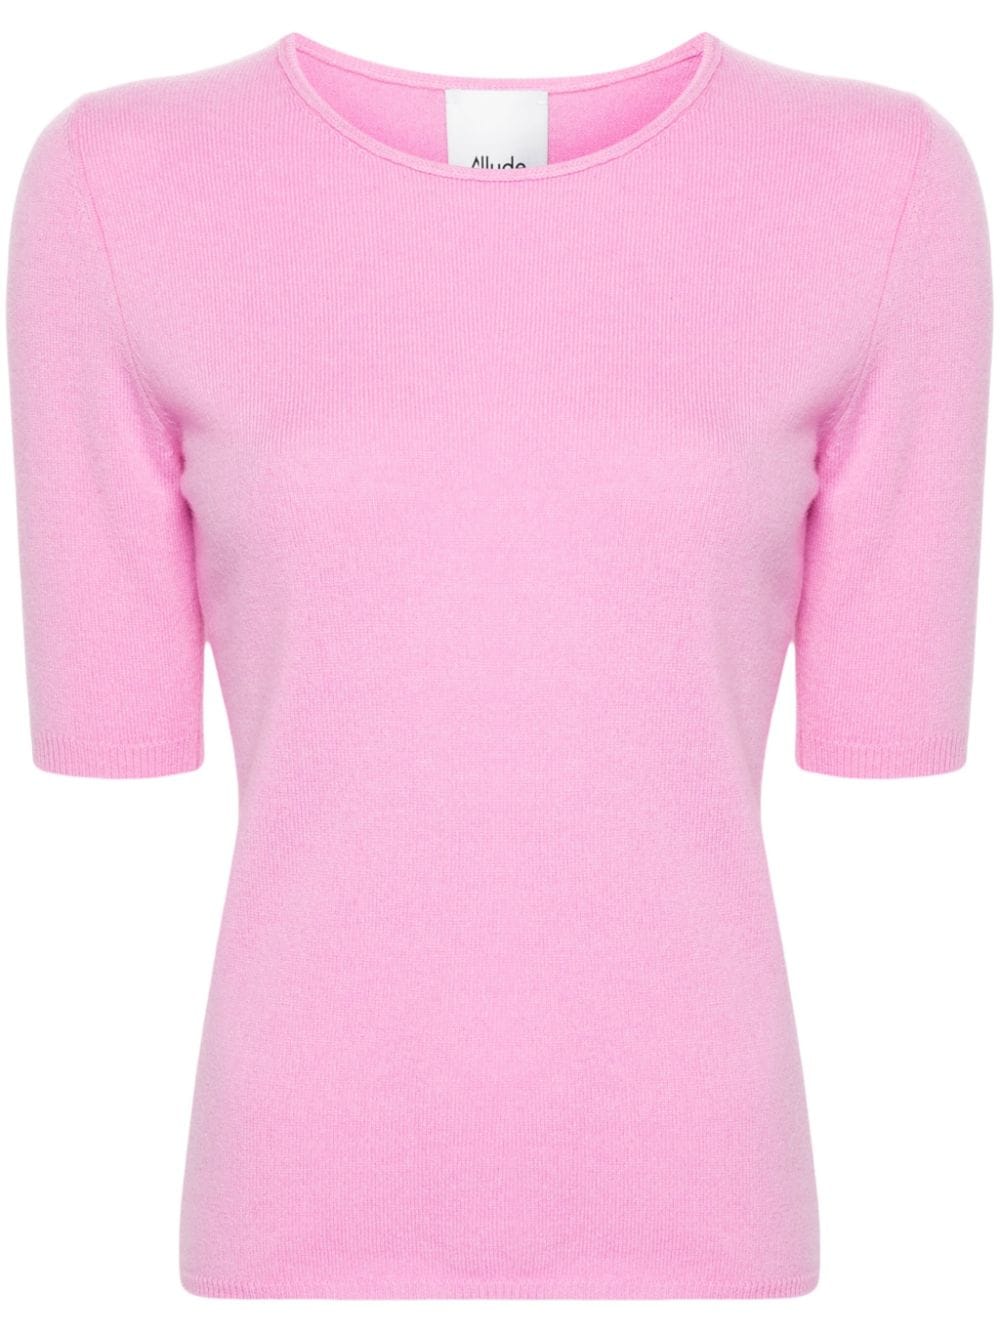 Allude short-sleeve knitted top - Pink von Allude